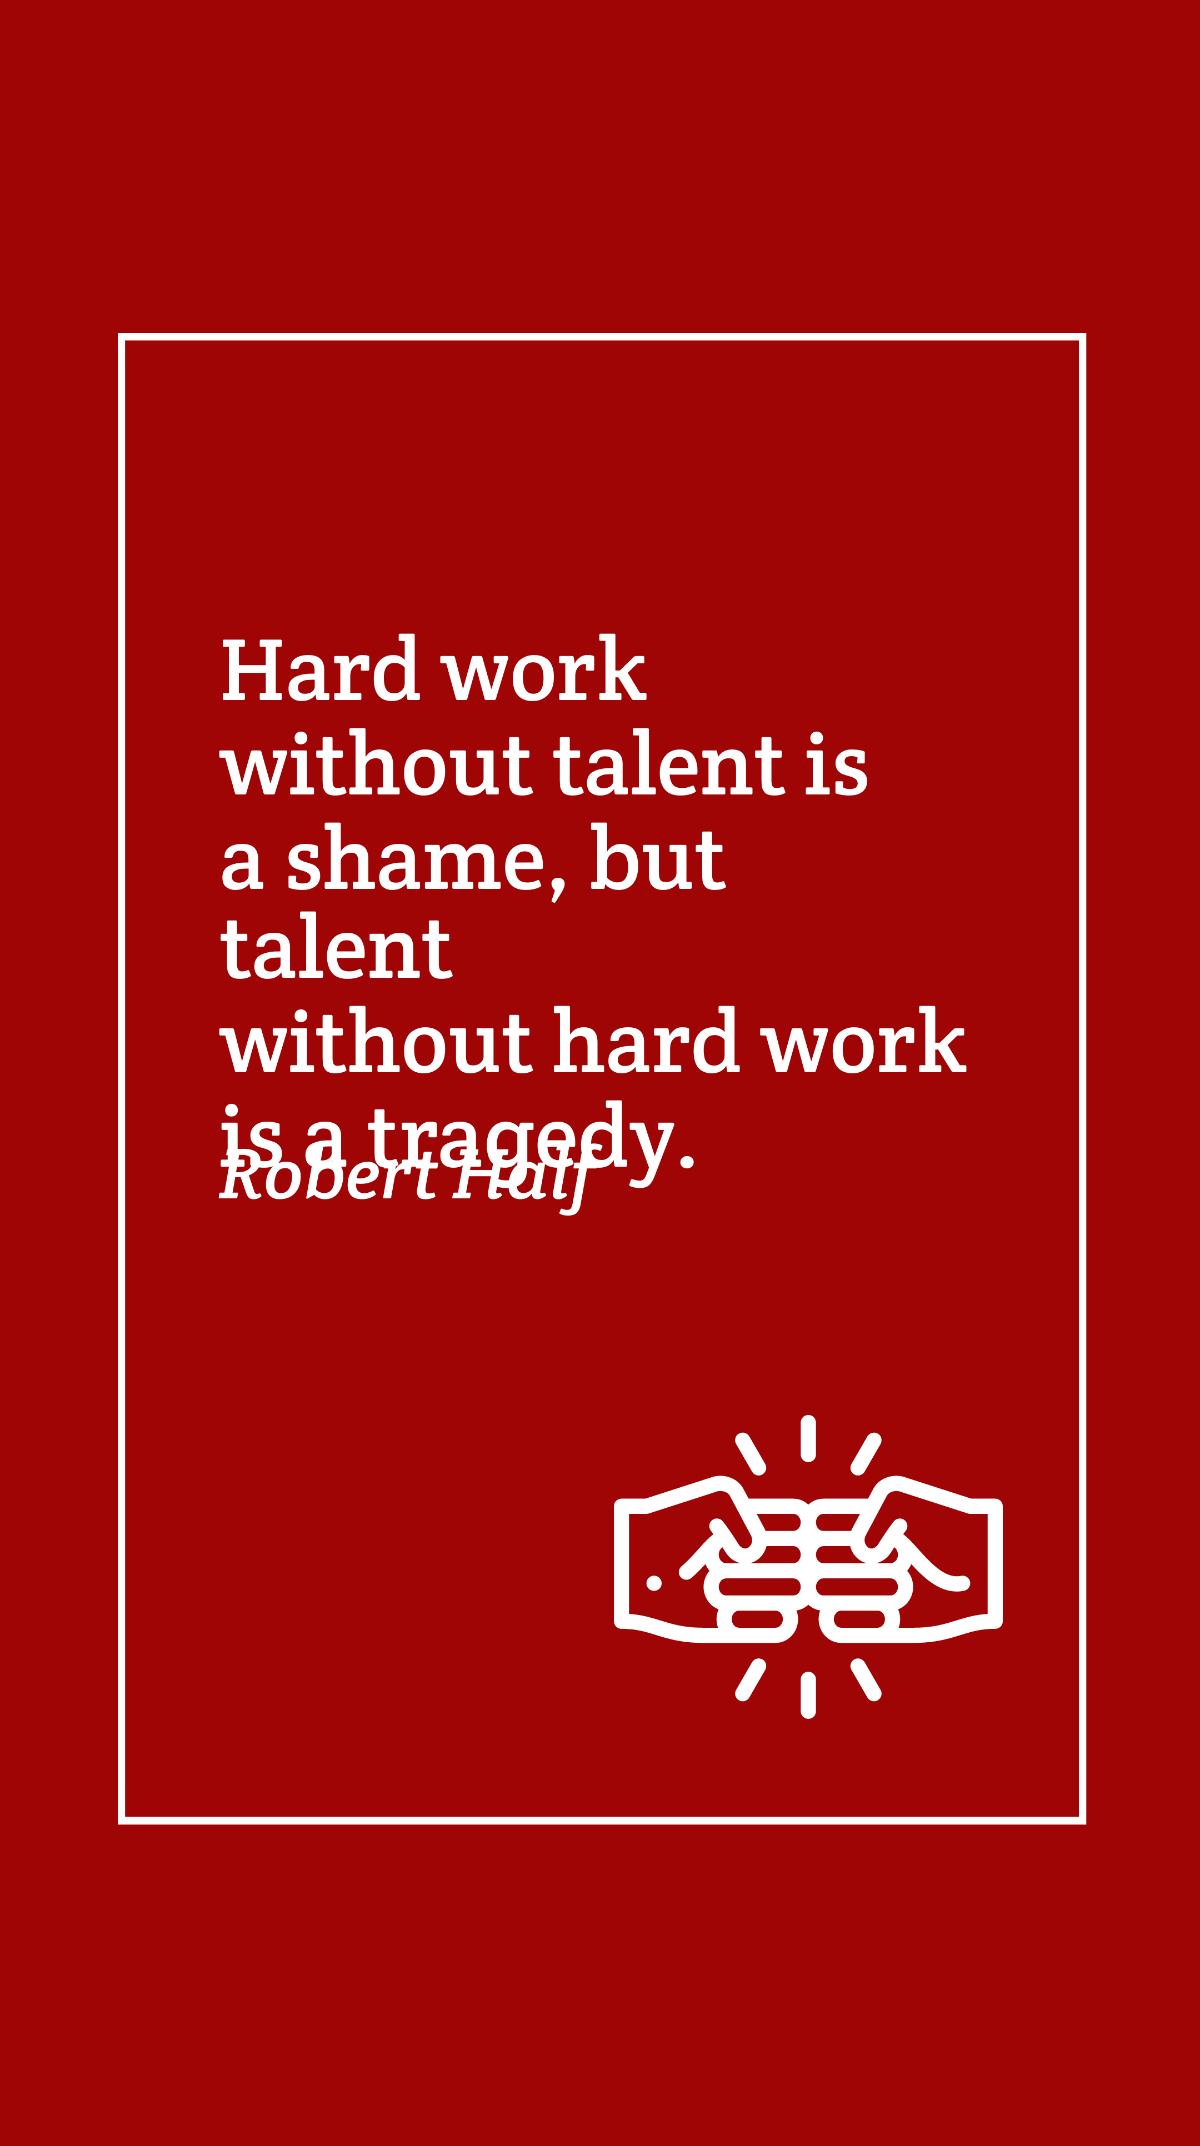 Robert Half - Hard work without talent is a shame, but talent without hard work is a tragedy.